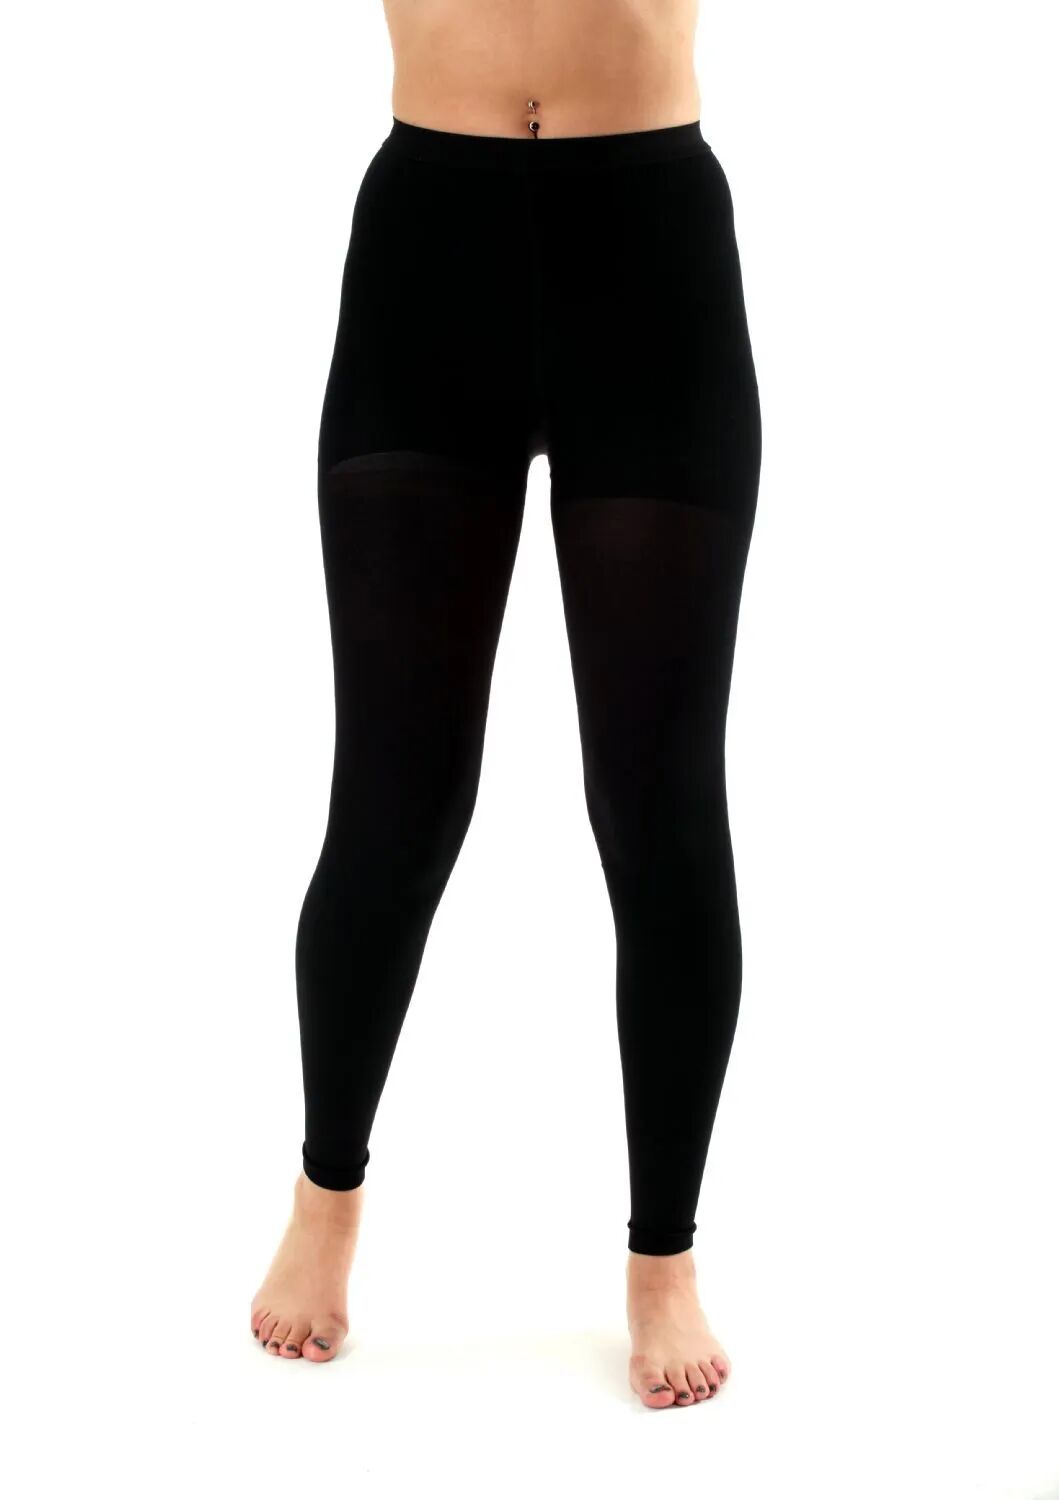 Absolute Support 20-30mmHg Firm Support Black Medium Women's Opaque Compression Leggings - A717BL2